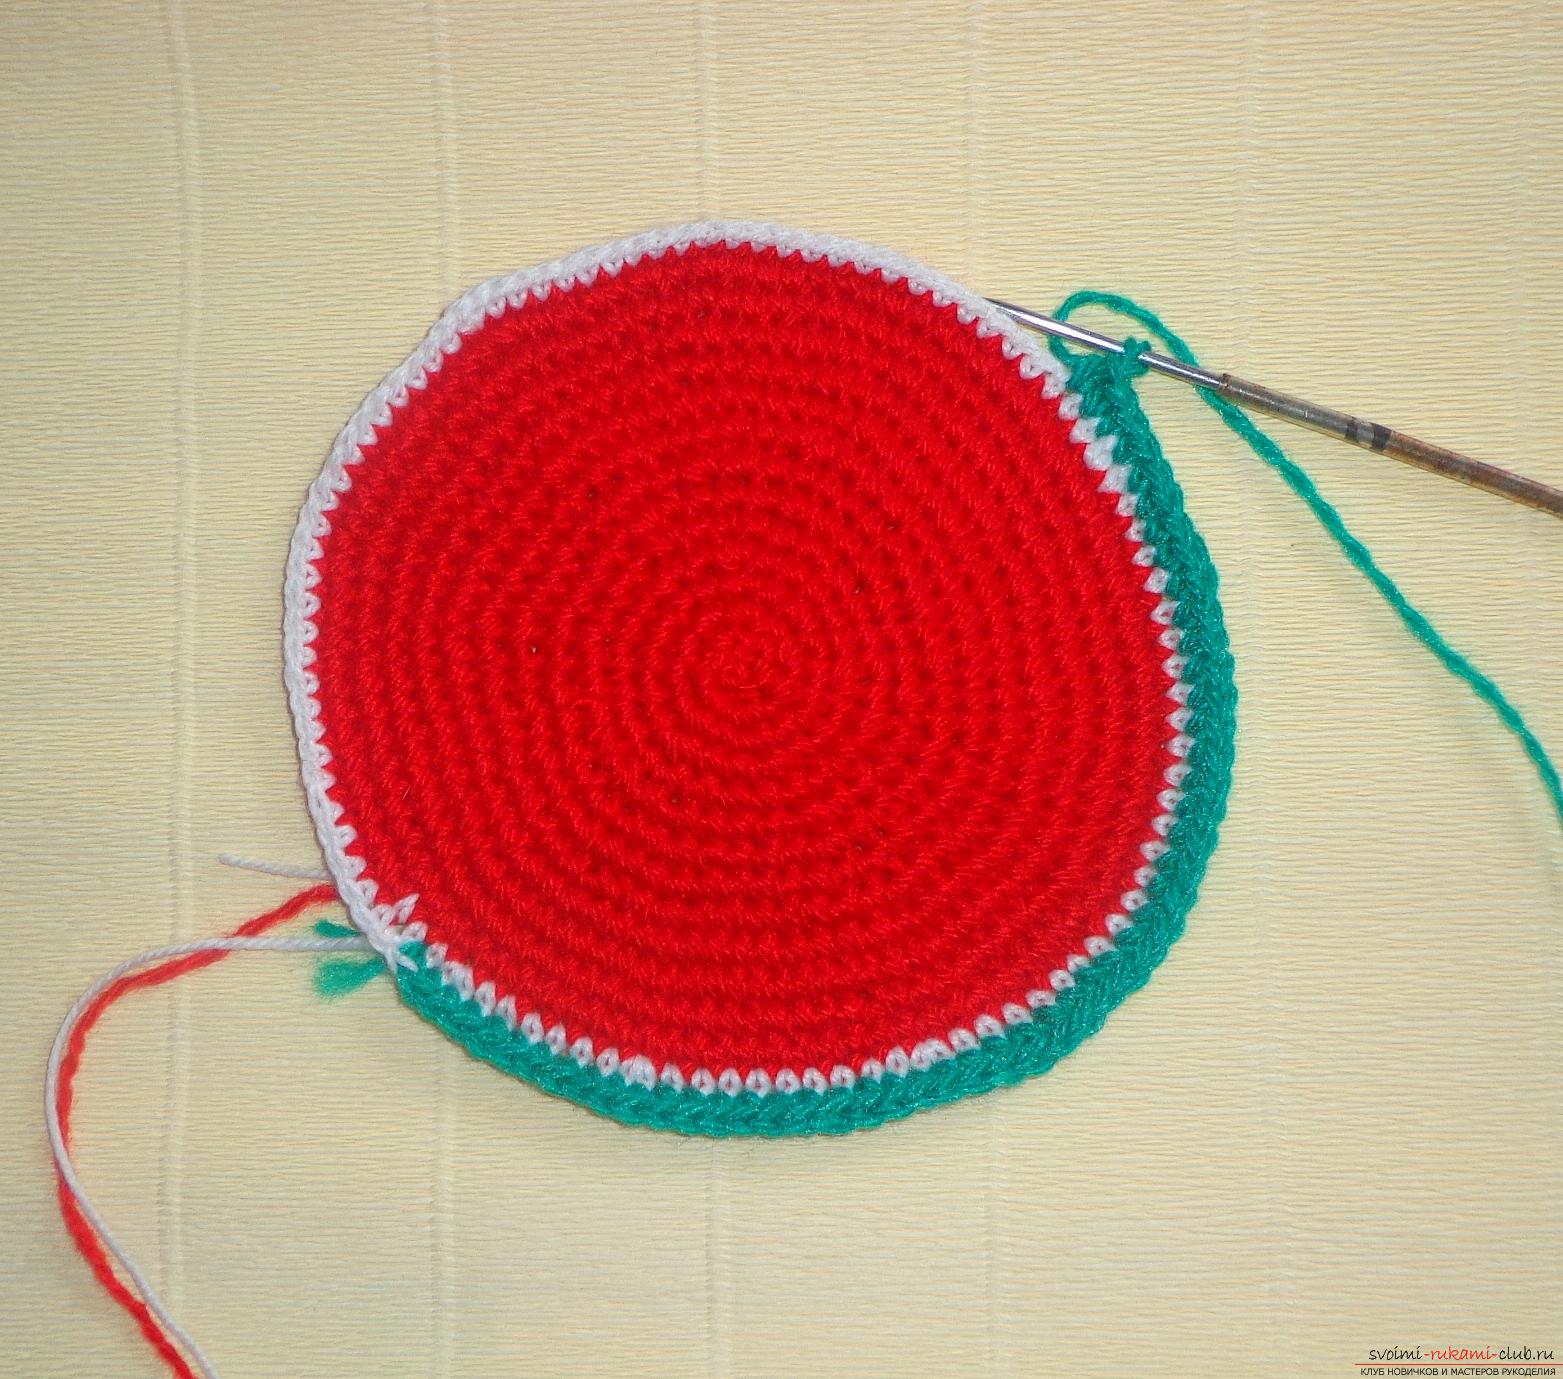 Photo to a lesson on crocheting crochet 